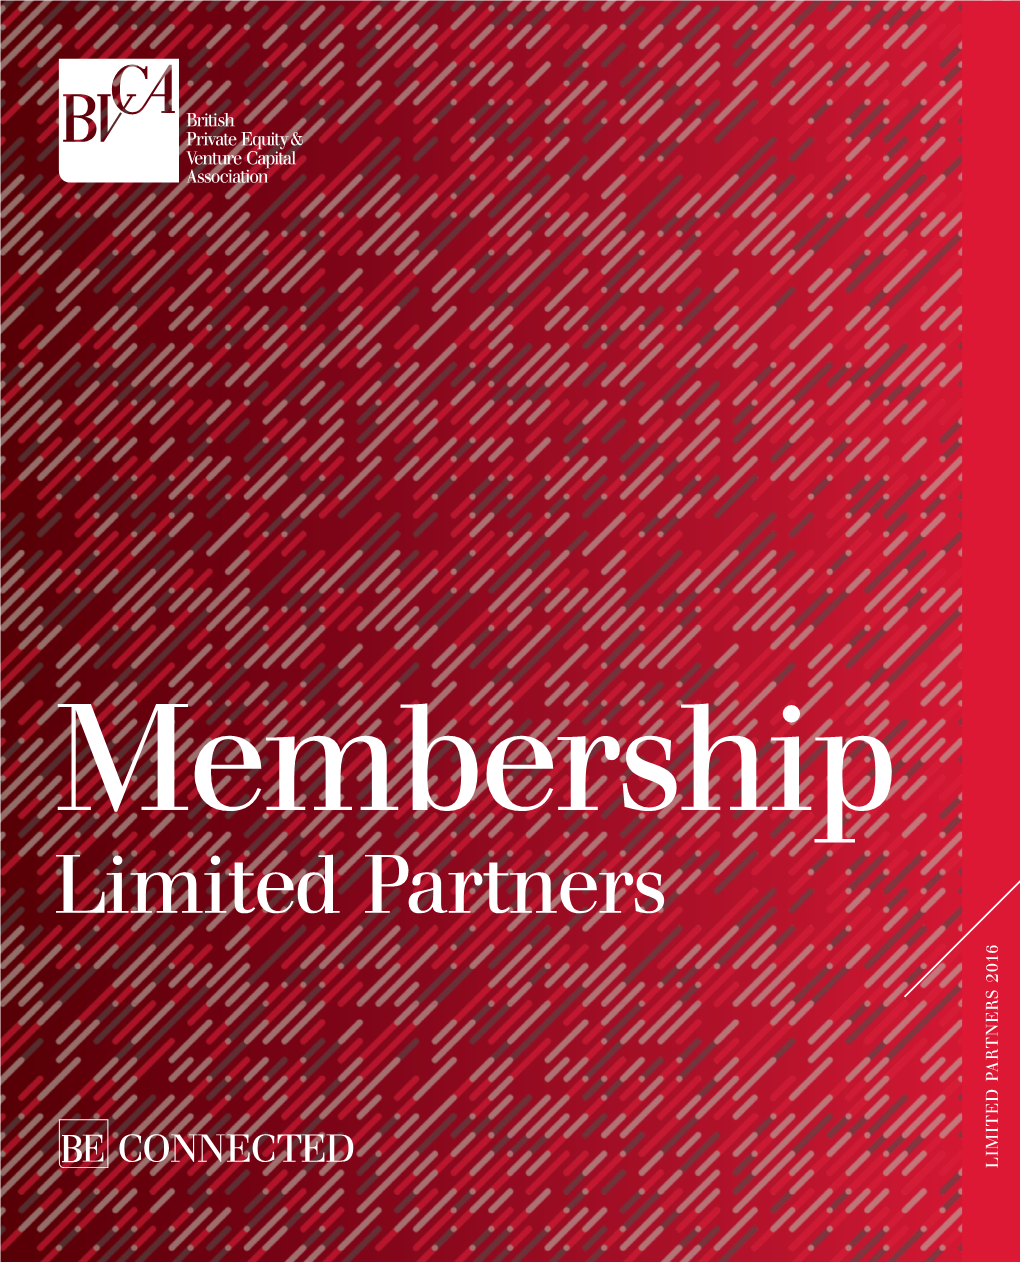 Limited Partners M Embership